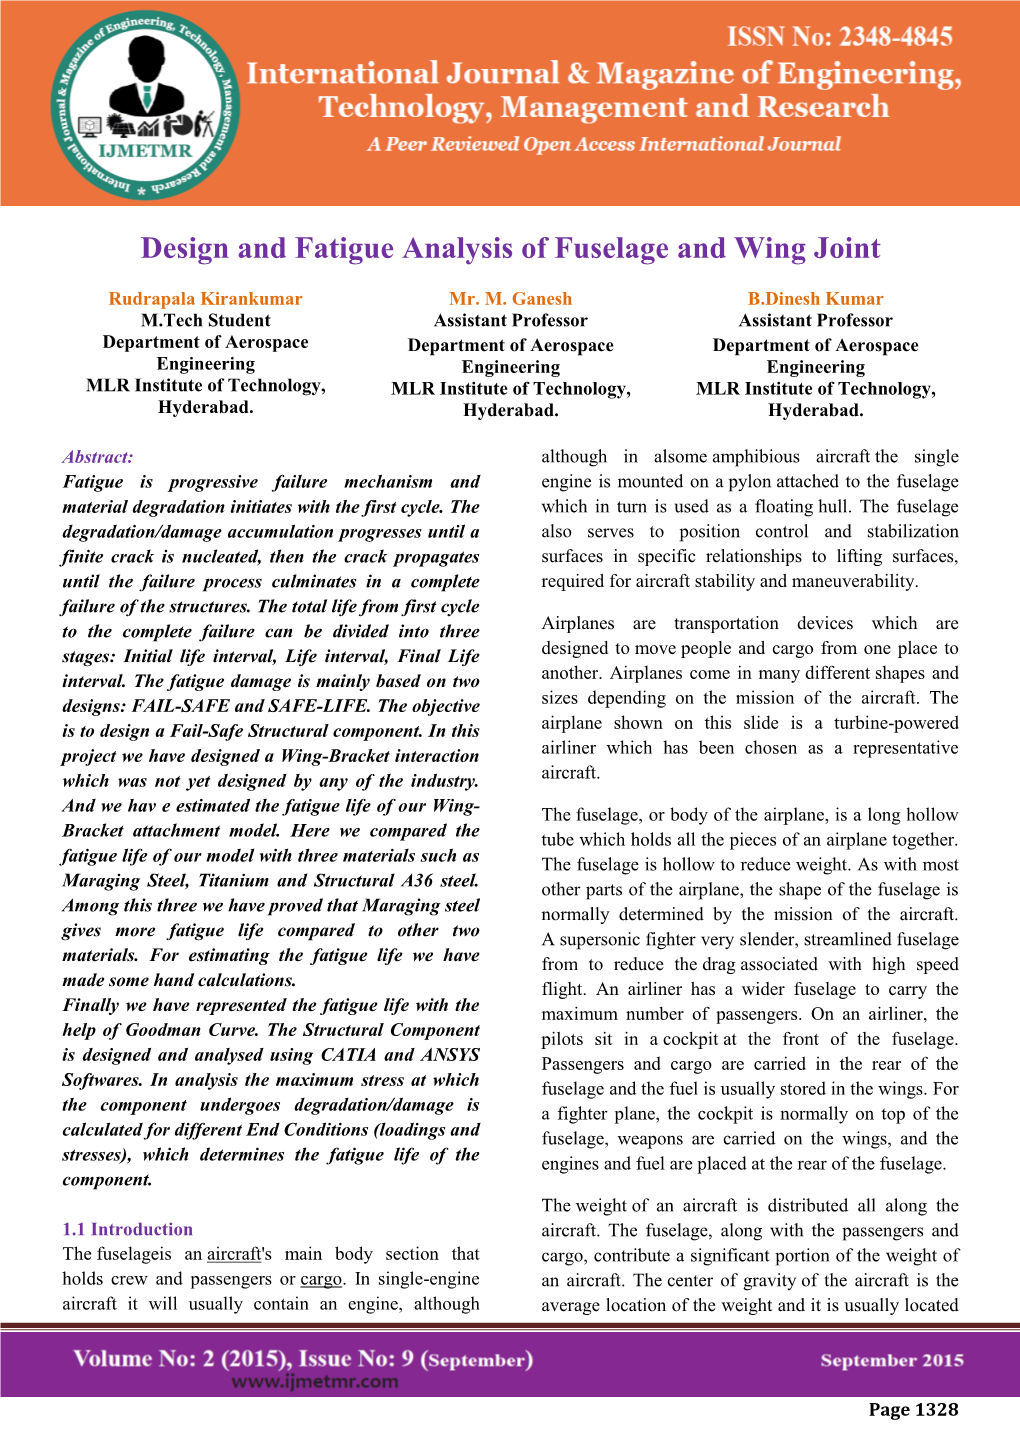 Design and Fatigue Analysis of Fuselage and Wing Joint Rudrapala Kirankumar, Mr.M.Ganesh & B